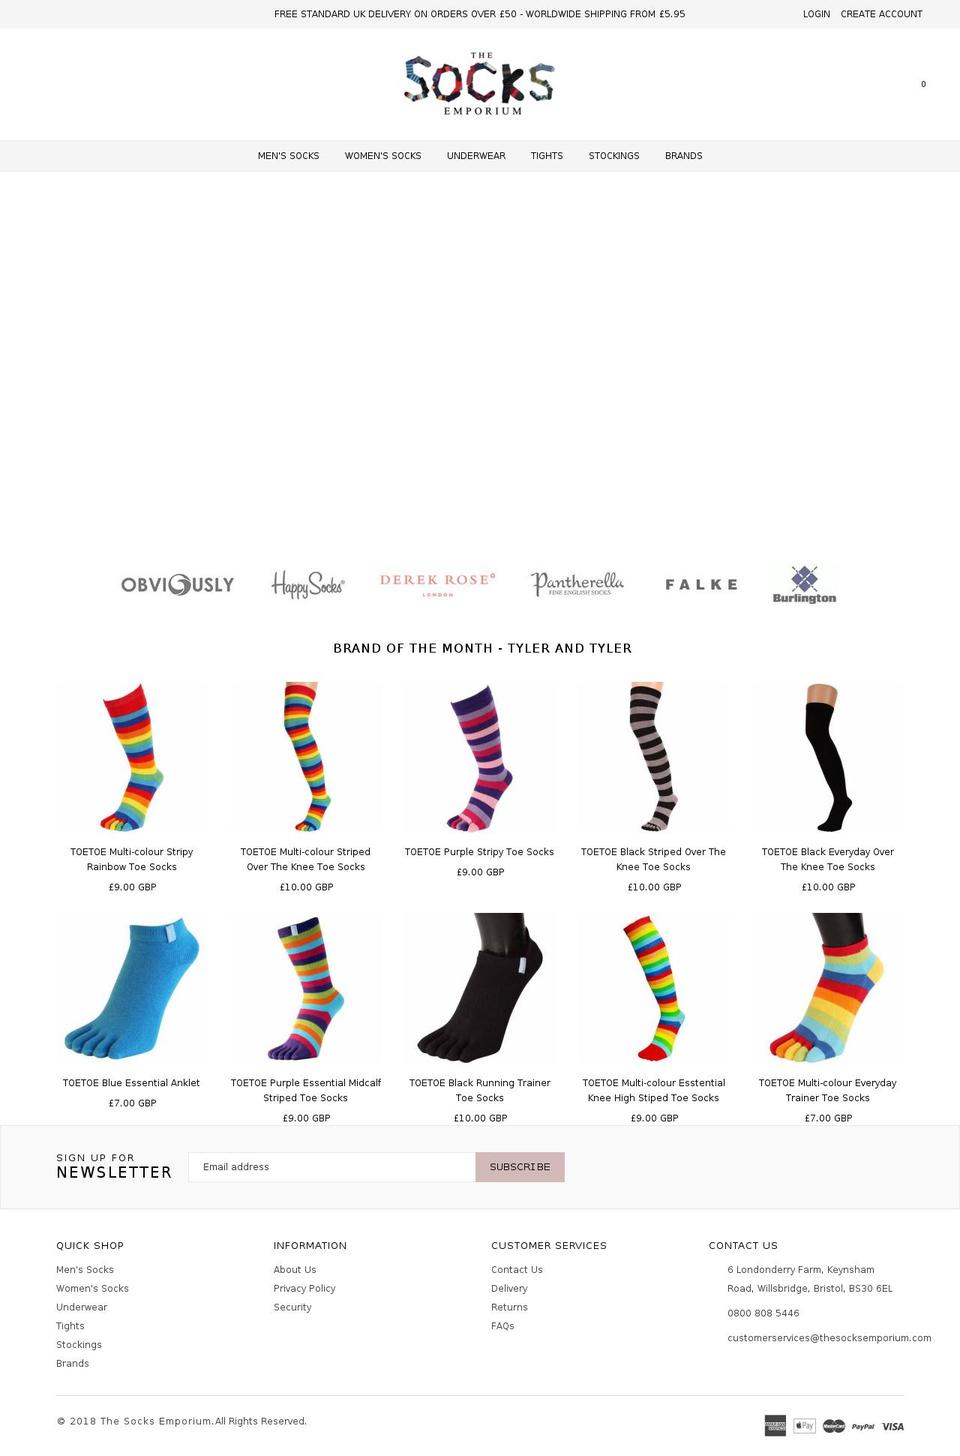 belle-original-with-bold-currency Shopify theme site example thesocksemporium.com